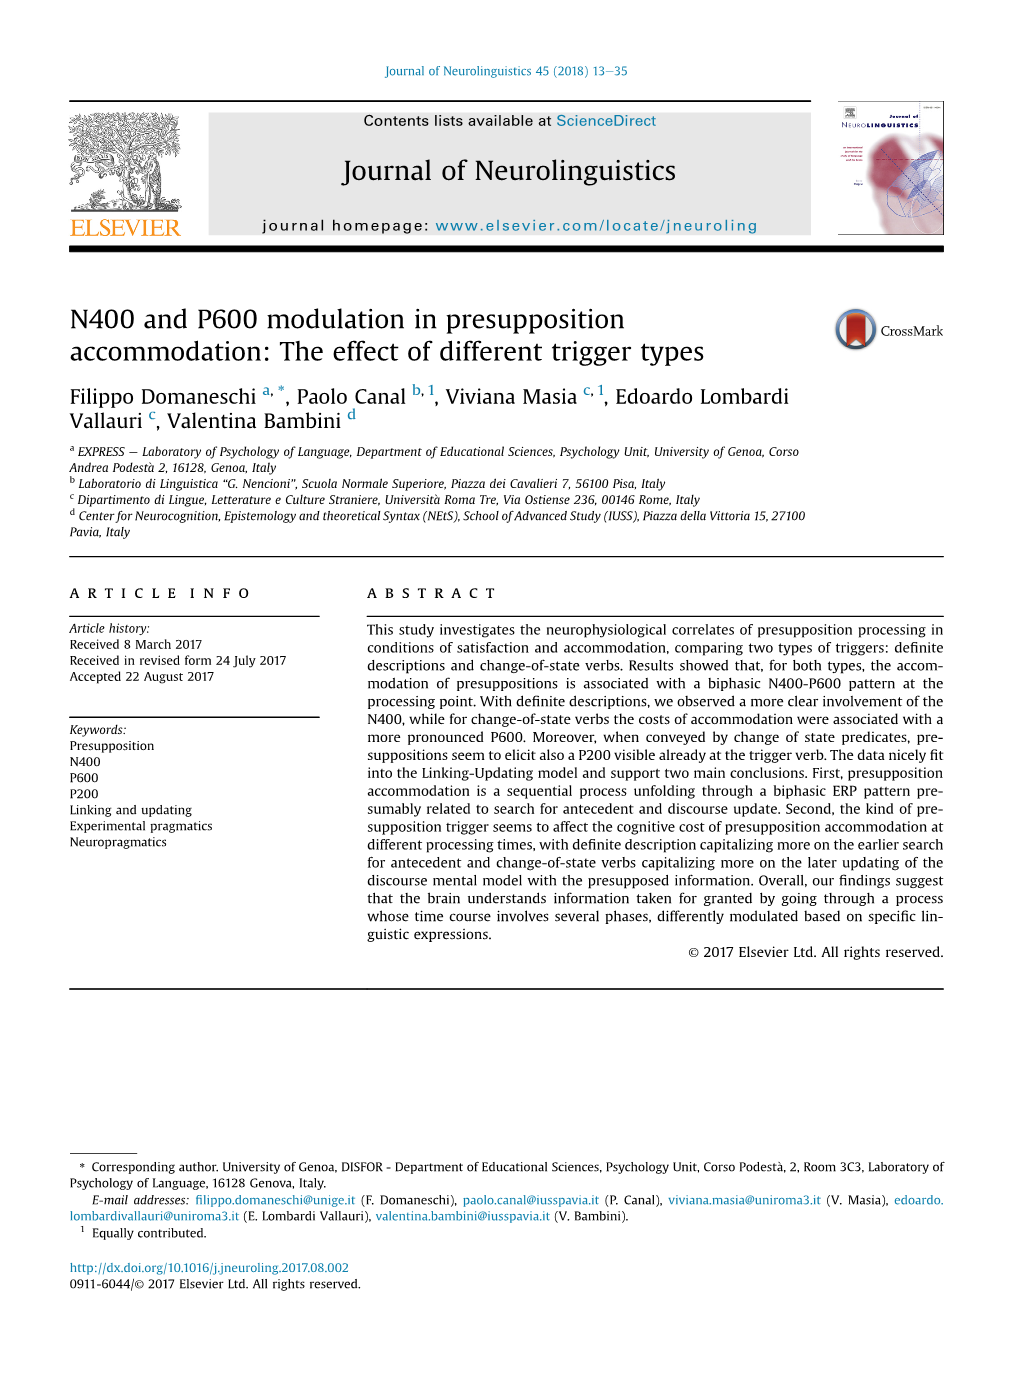 N400 and P600 Modulation in Presupposition Accommodation: the Effect of Different Trigger Types